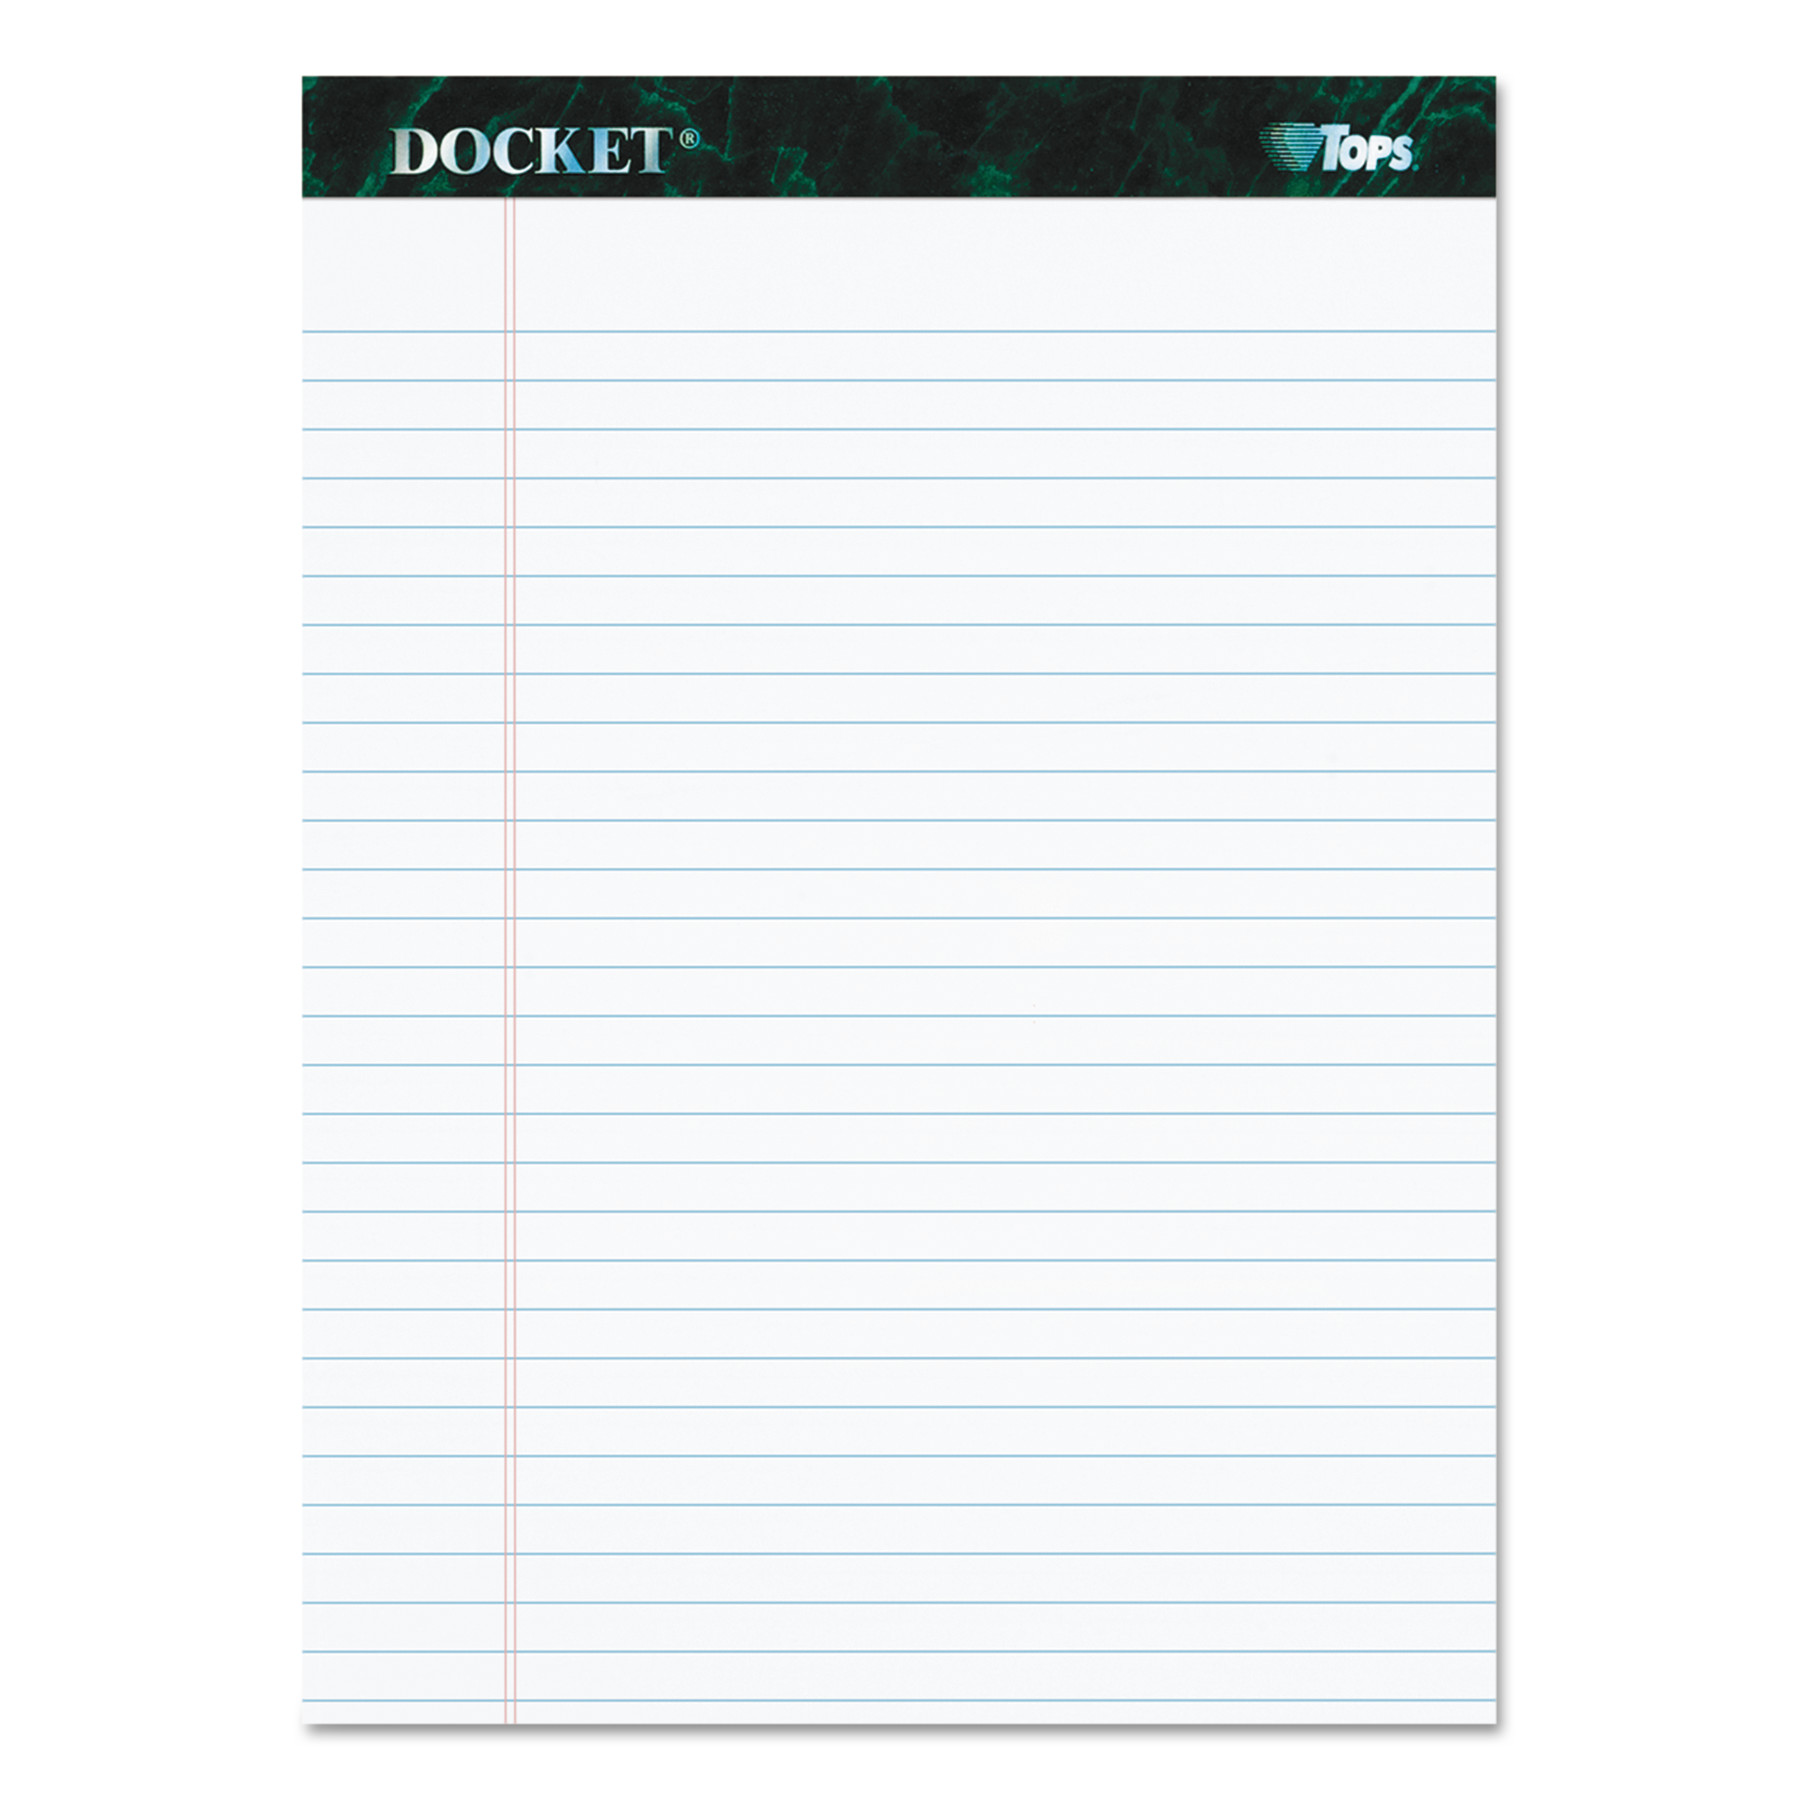 TOPS Docket Letr-Trim Legal Ruled White Legal Pads - 50 Sheets - Double Stitched - 0.34" Ruled - 16 lb Basis Weight - 8 1/2" x 1